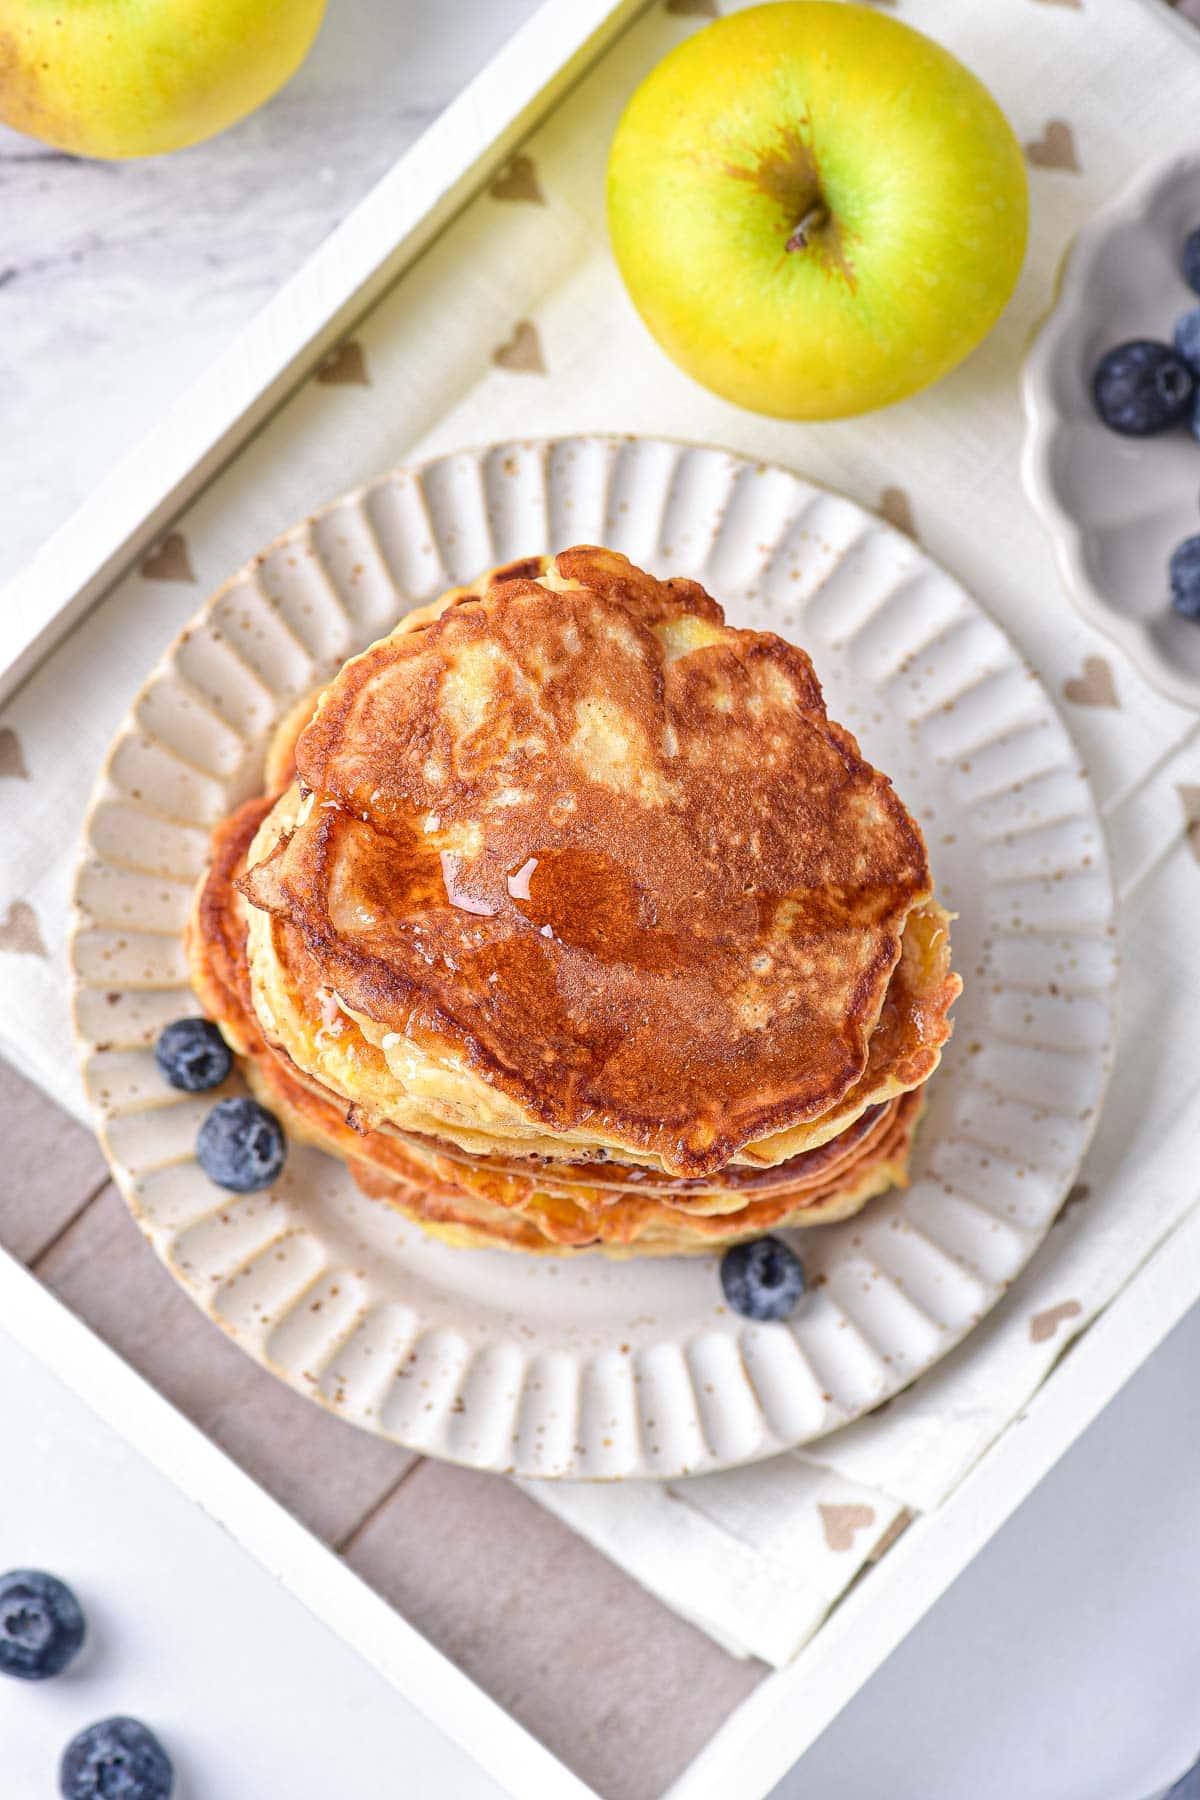 tall stack of golden brown apple pancakes on white plate with berries and apple around.